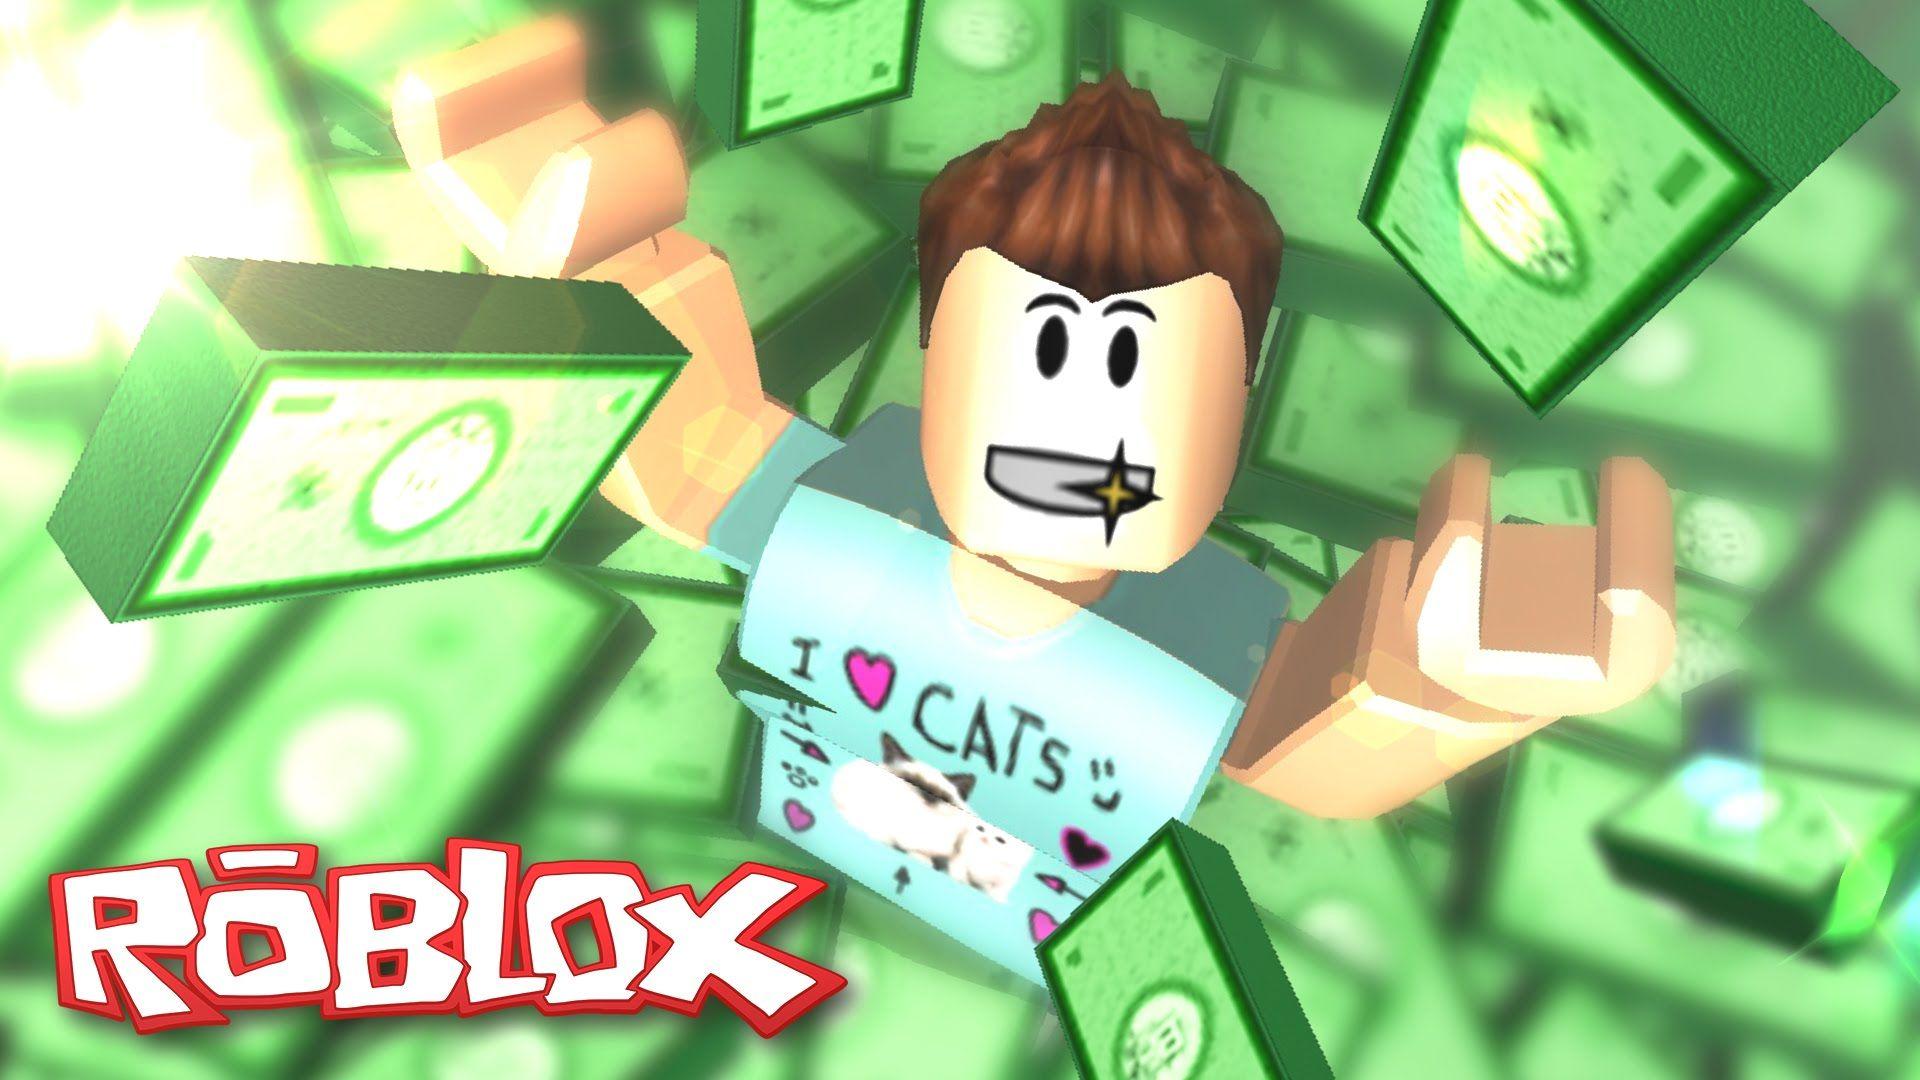 Robux Wallpapers Top Free Robux Backgrounds Wallpaperaccess